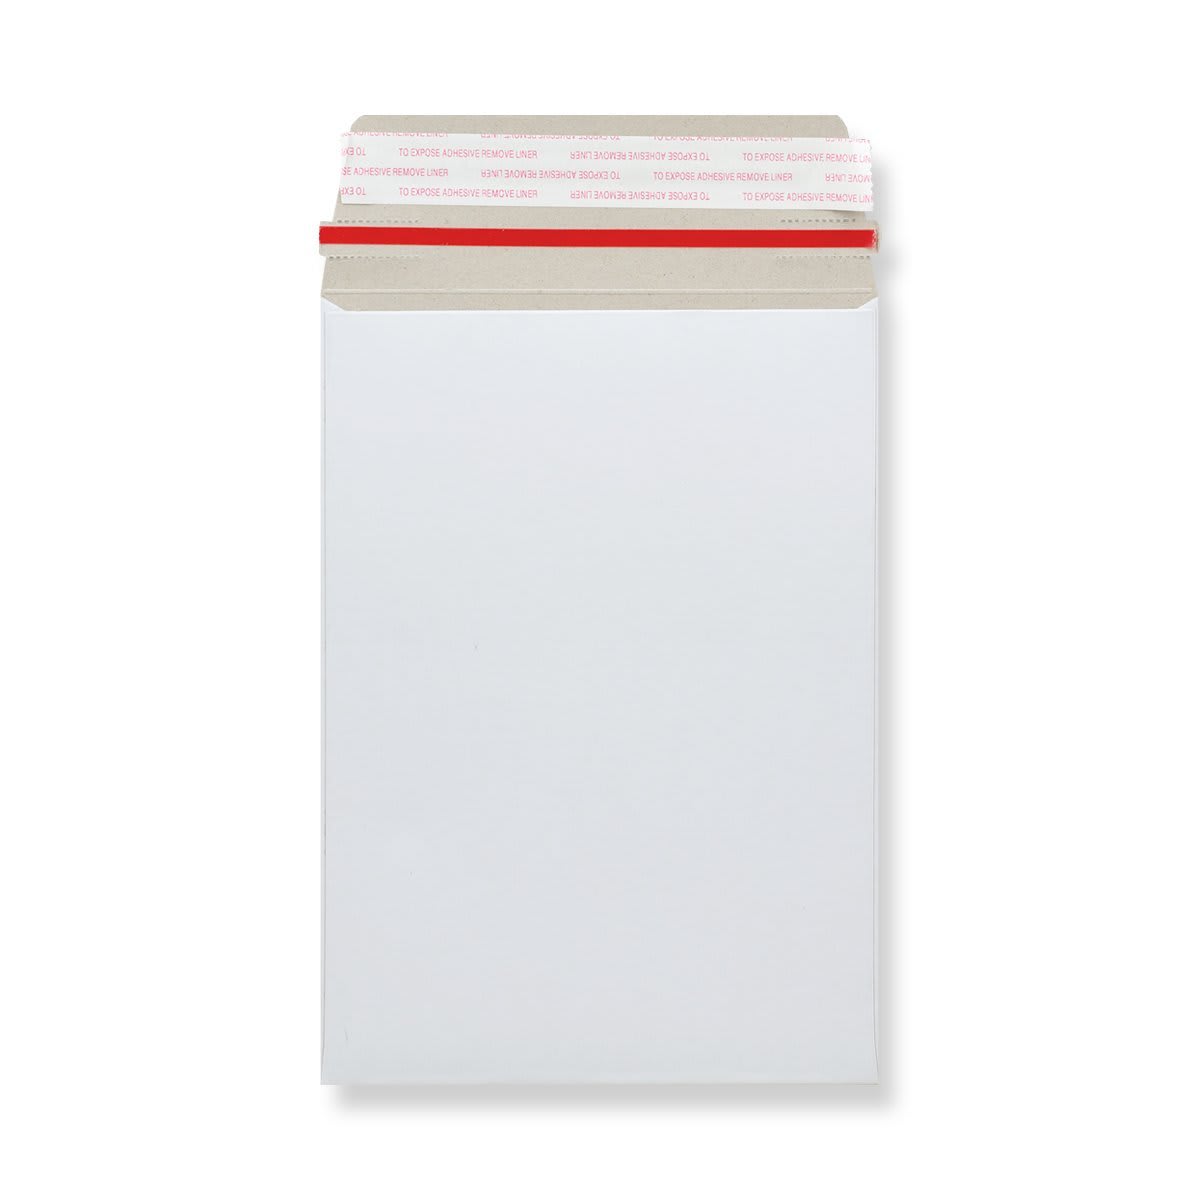 352x249 White All Board Pocket Peel & Seal Plain 350gsm Wove With Red Rippa Strip Envelopes